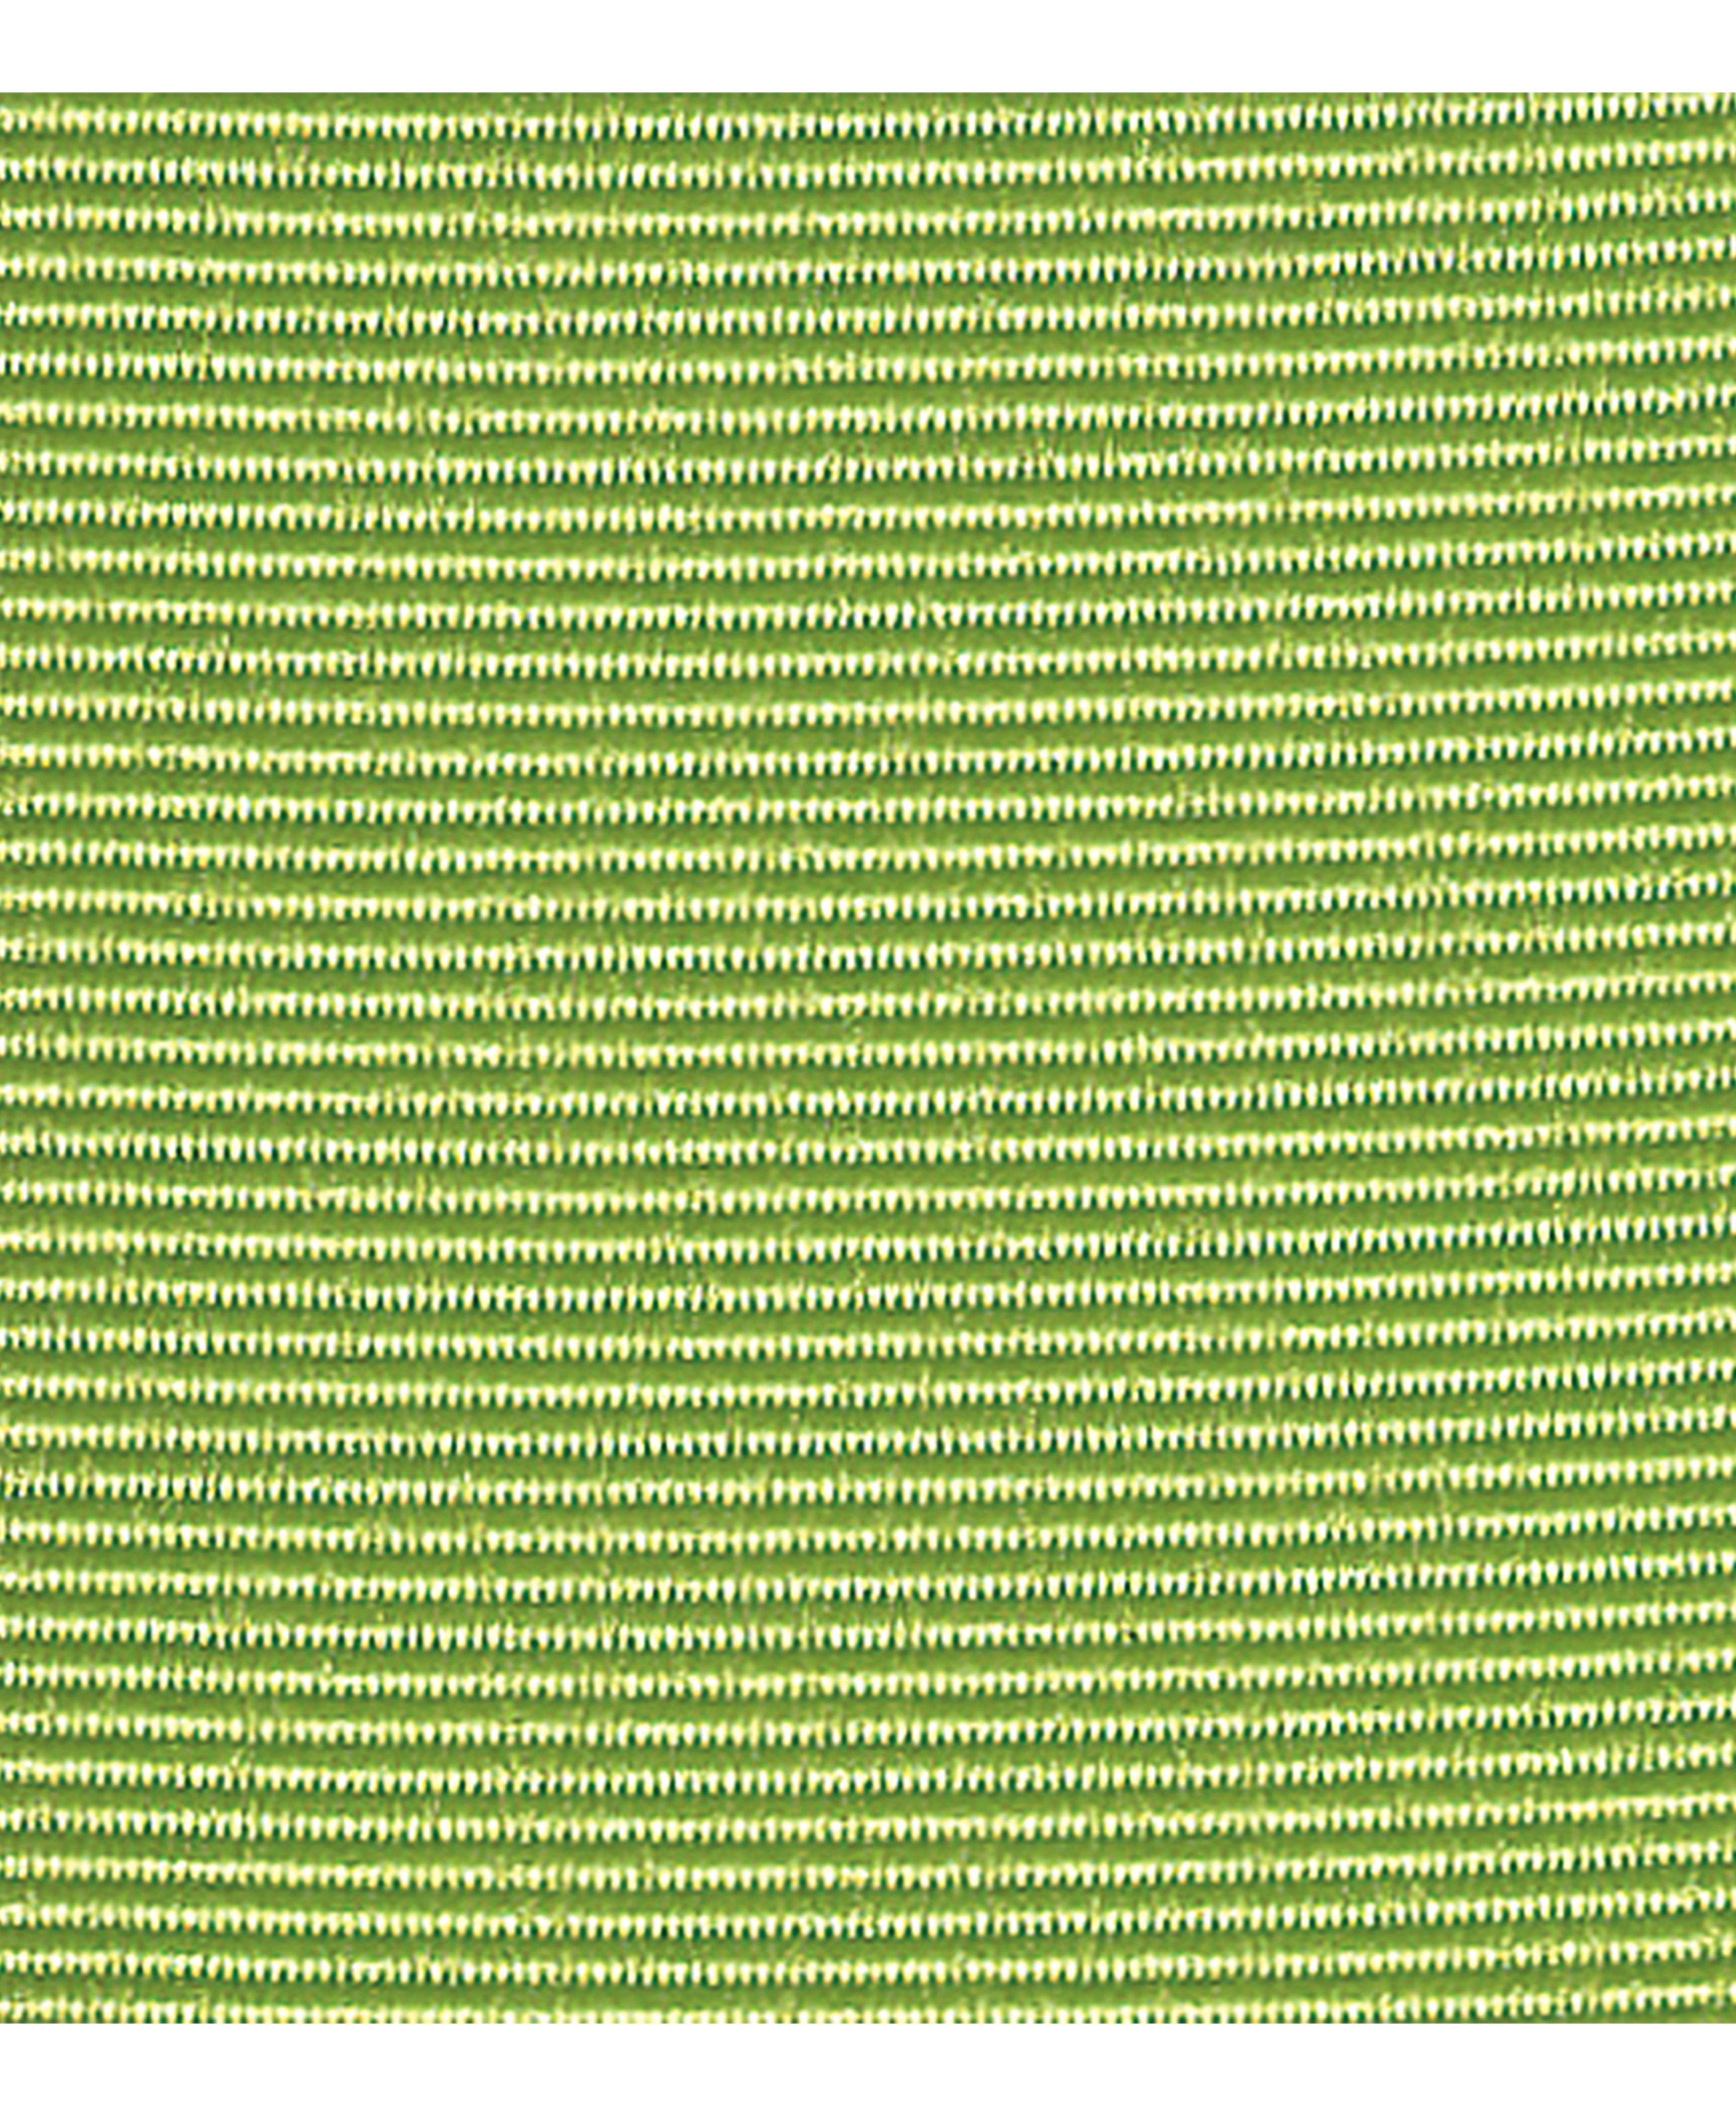 Apple Green Texture 3/8 Inch x 100 Yards Grosgrain Ribbon - Order Now!